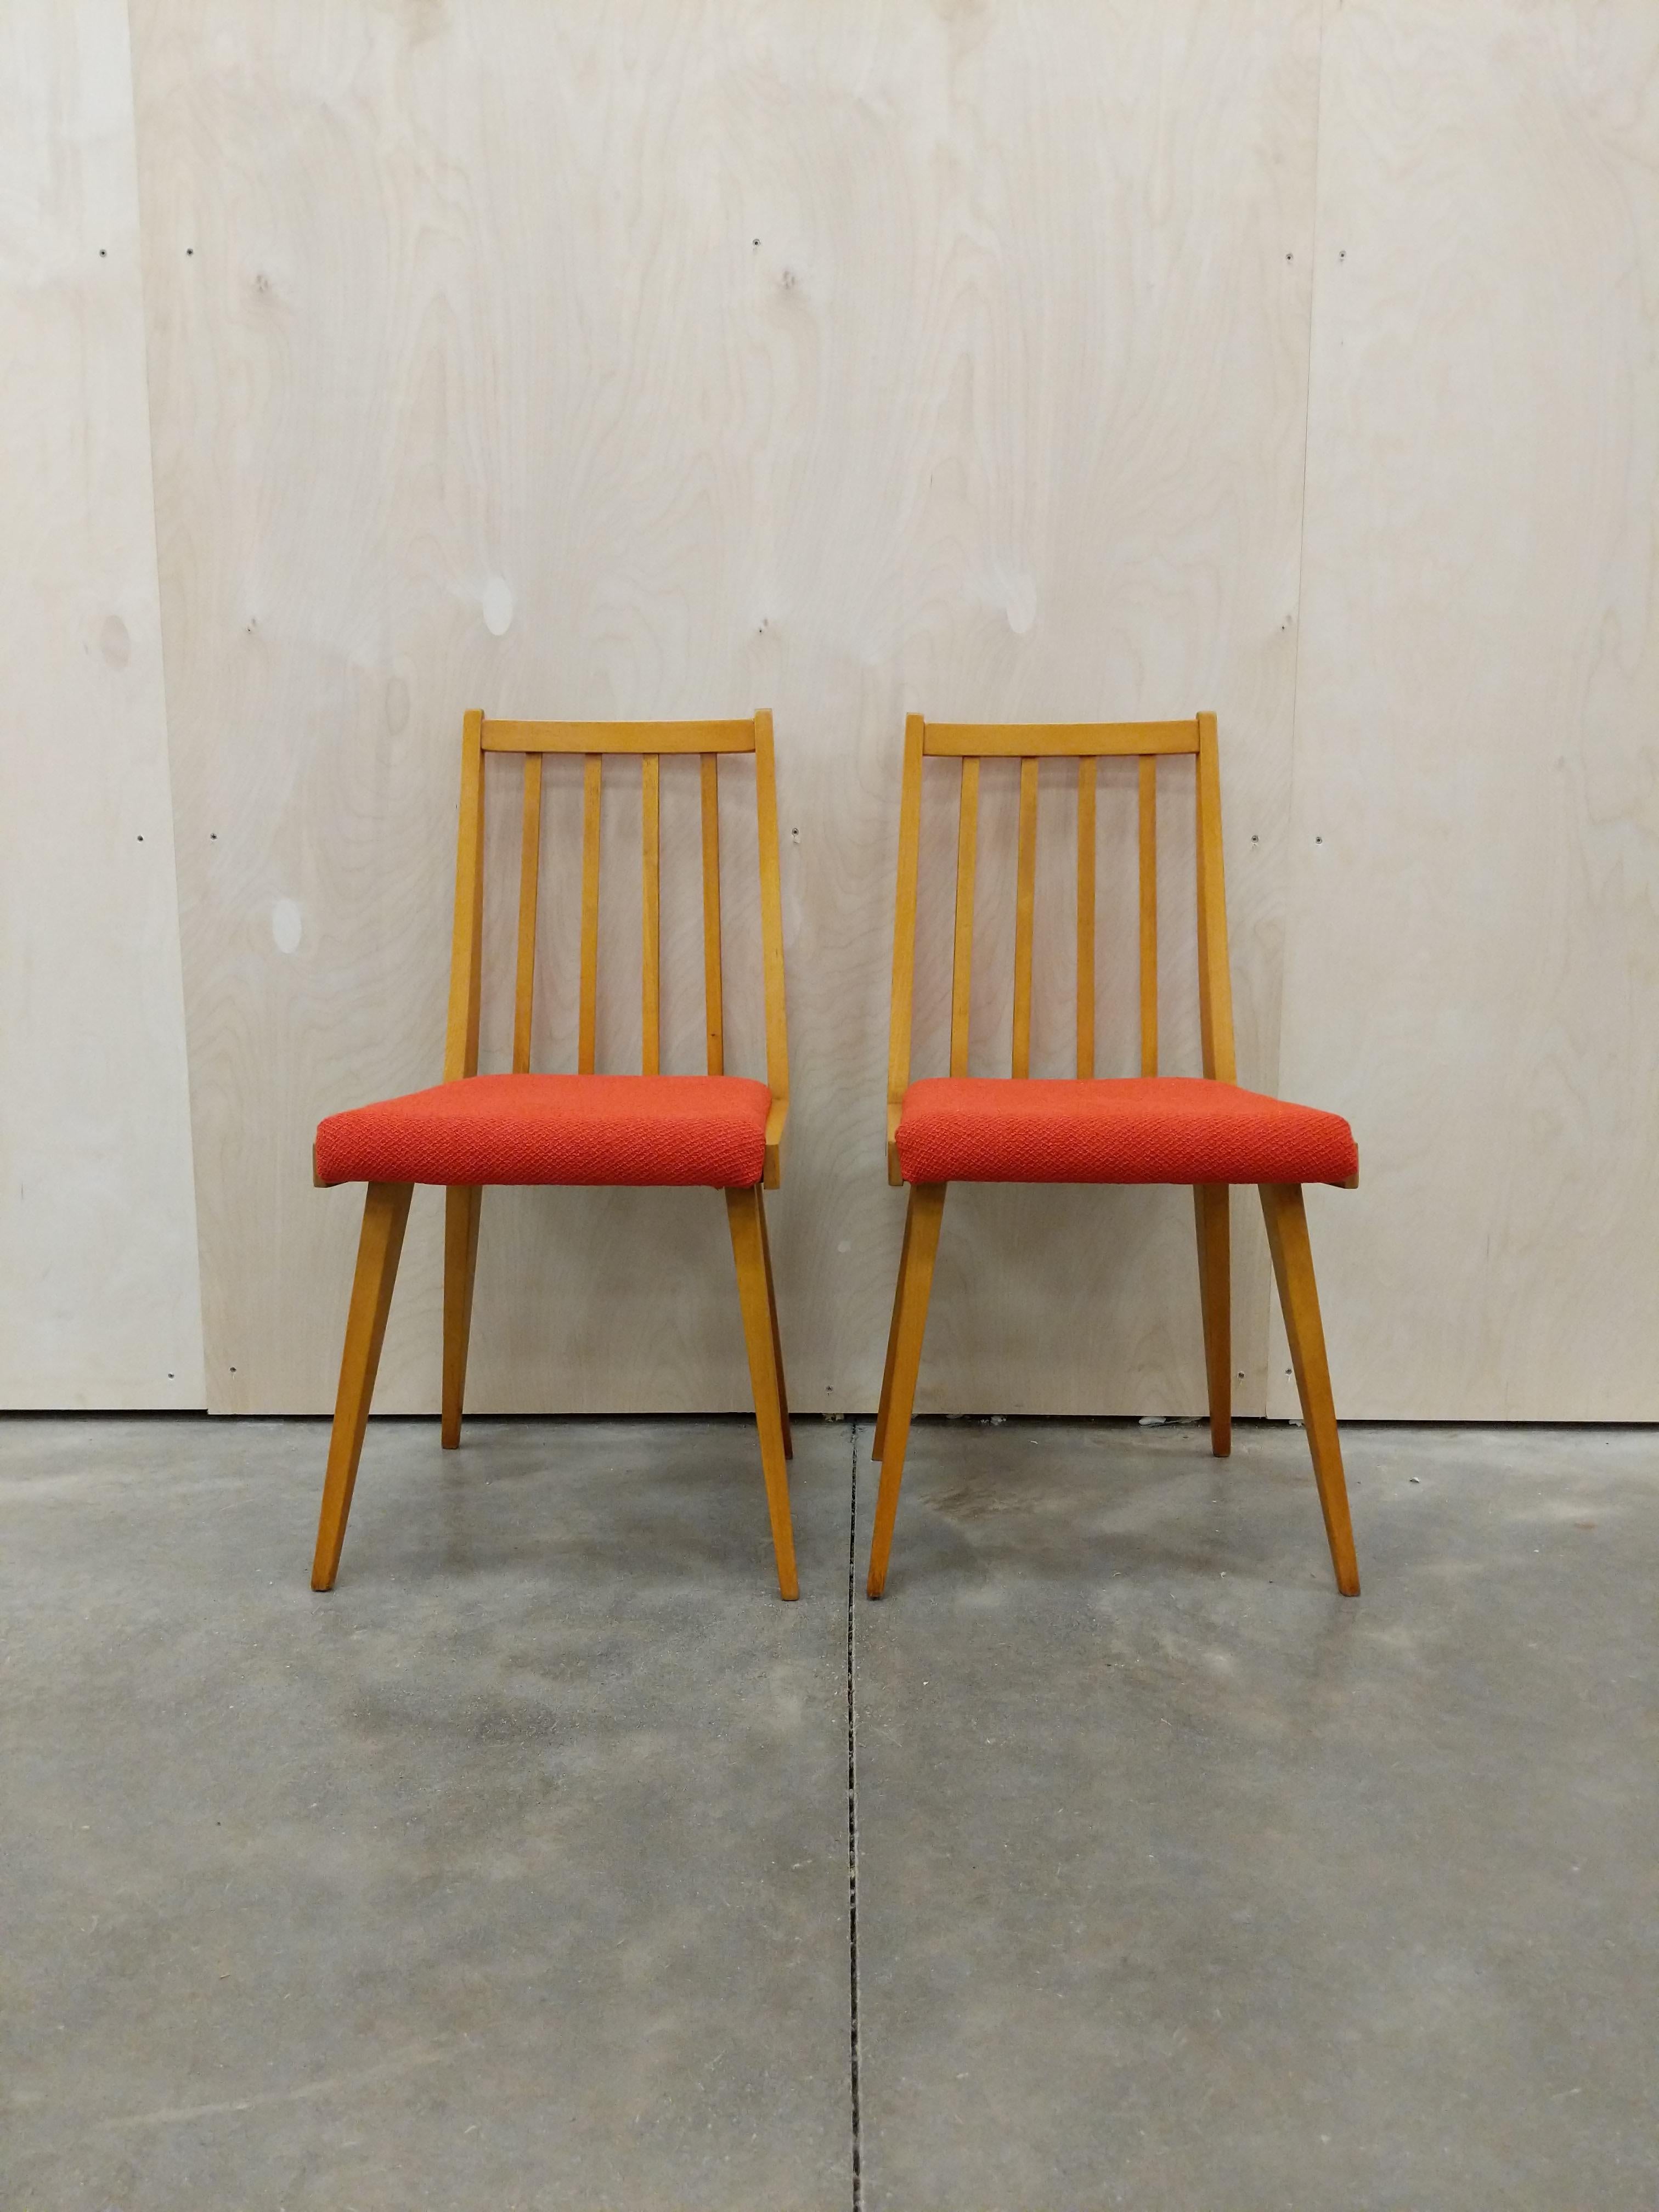 Pair of authentic vintage Czech mid century modern dining chairs.

This set is in excellent vintage condition with brand new Knoll upholstery and few signs of age-related wear (see photos).

We used Knoll 